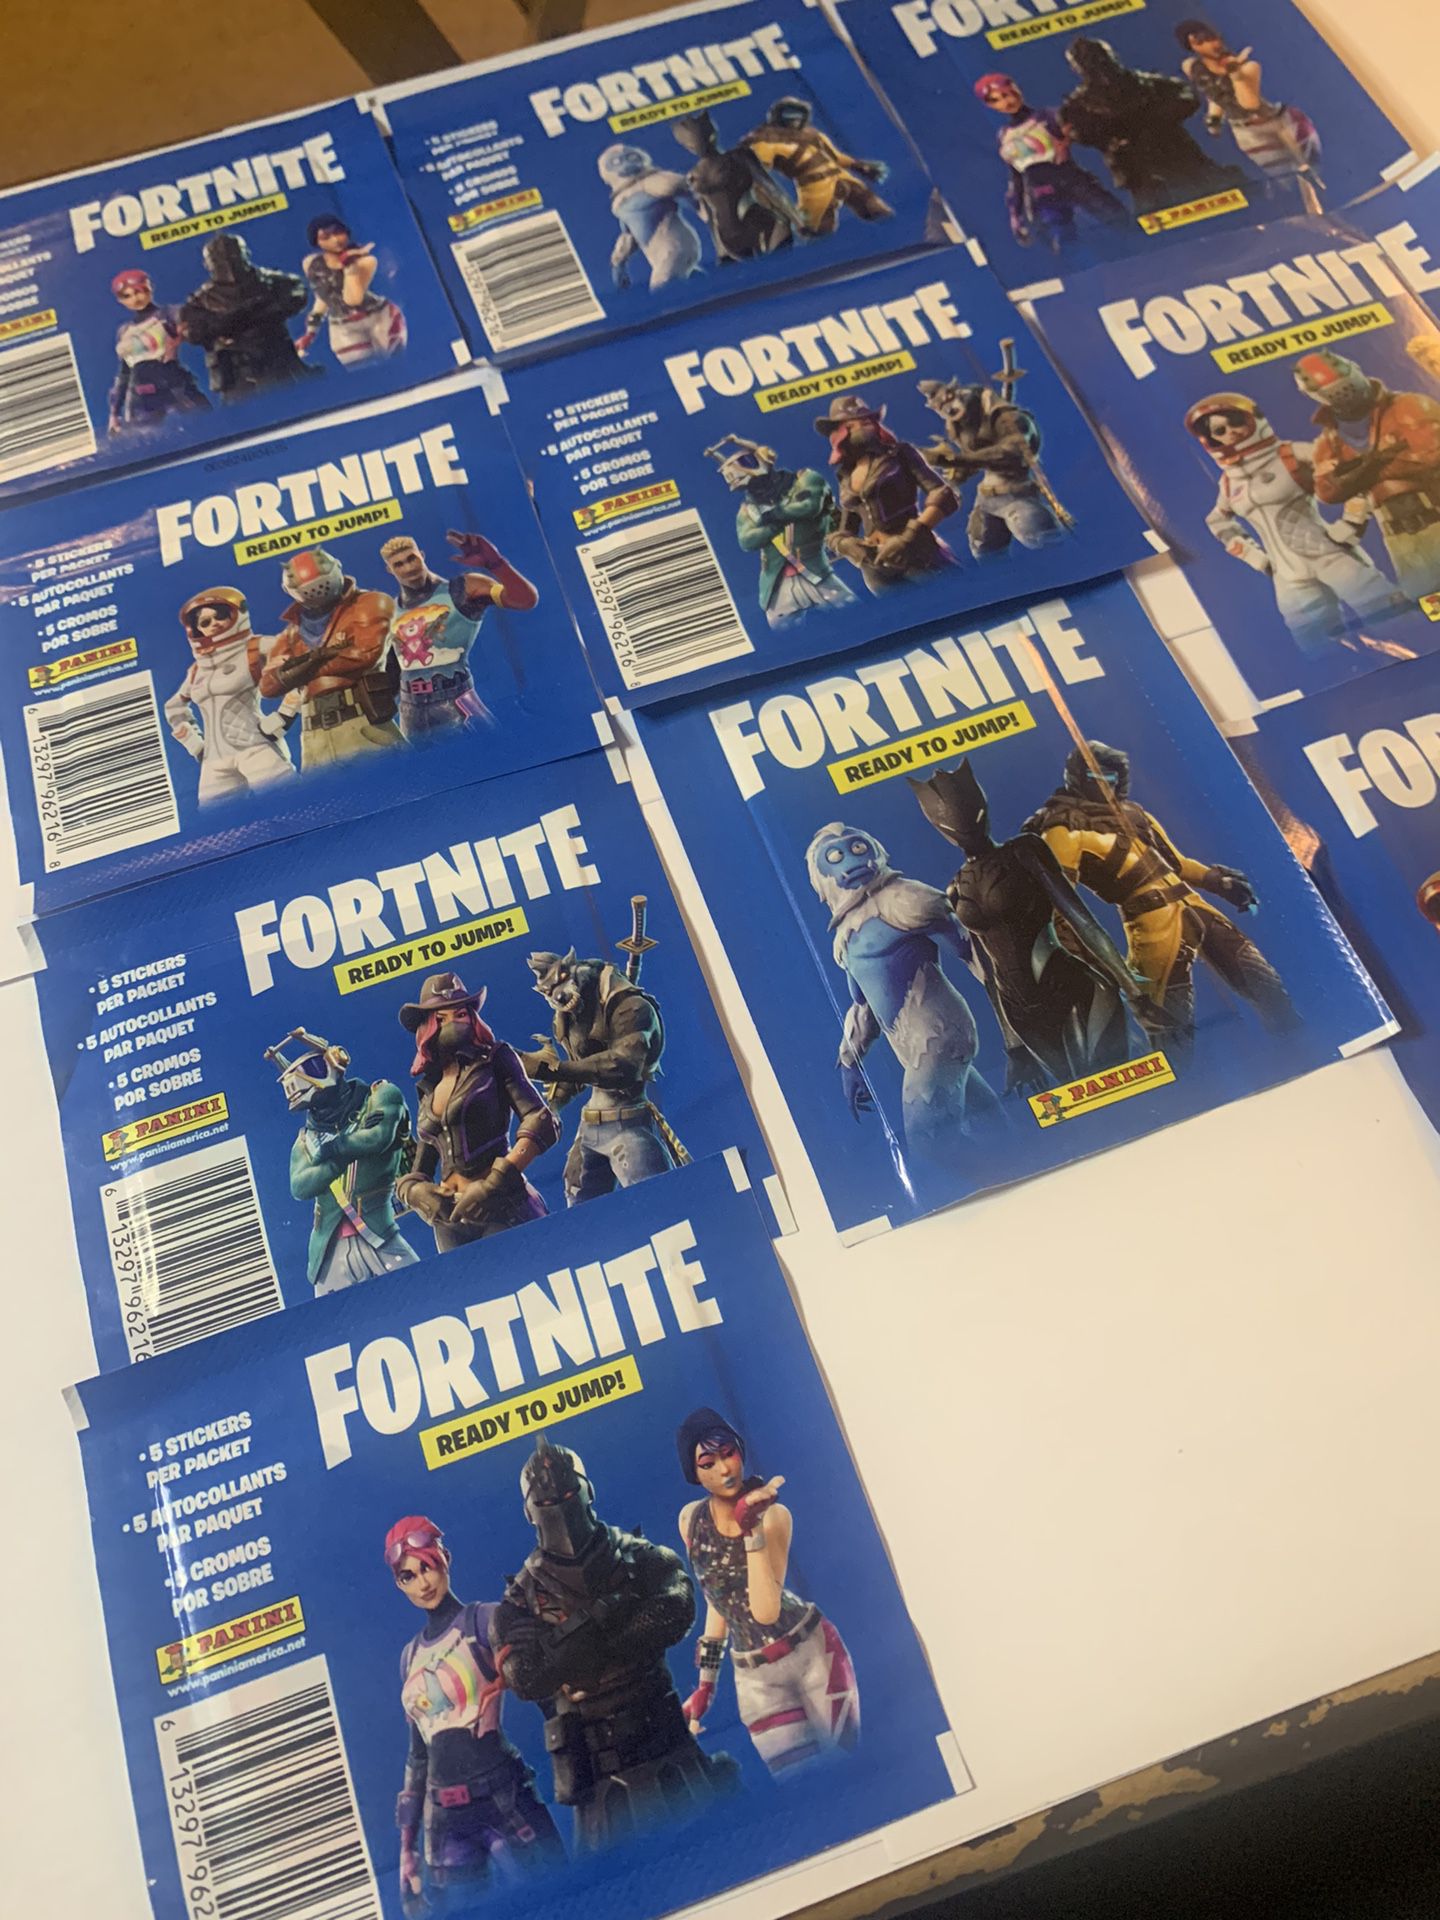 Fortnite Ready To Jump Sticker Collection, 2019 Panini, (10) Sealed Packs 50 Total Stickers